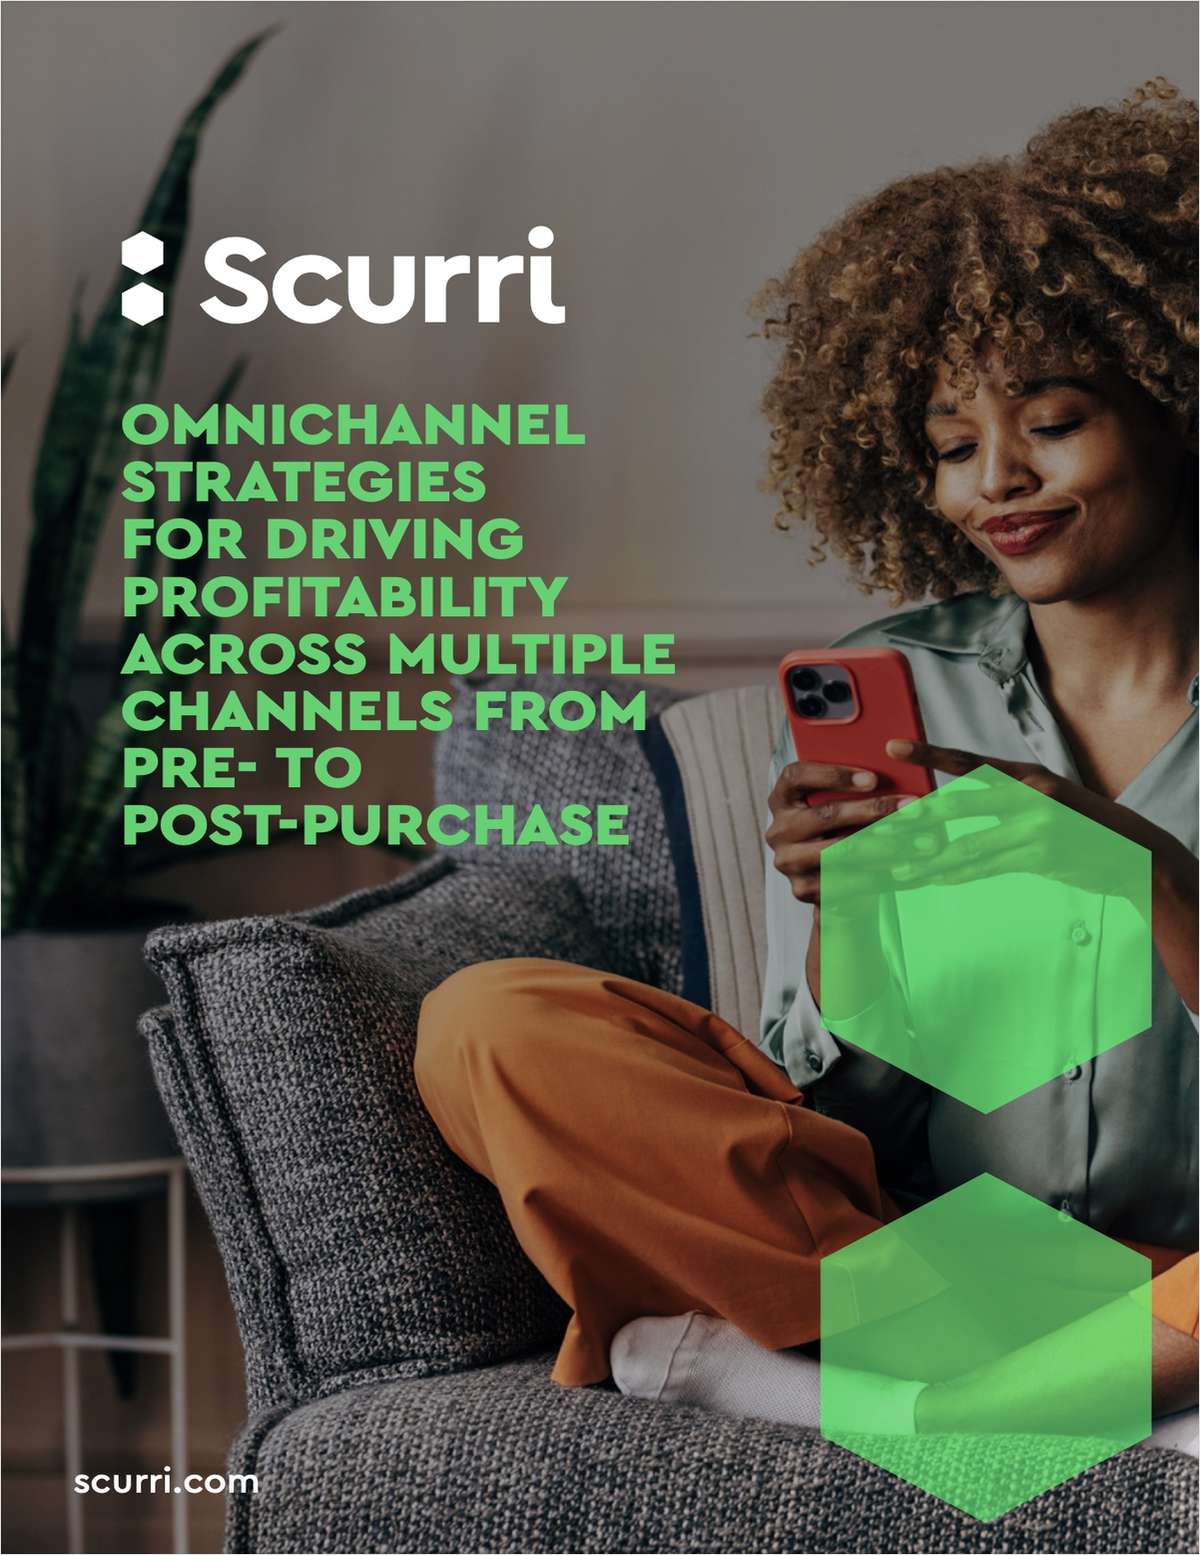 Omnichannel Strategies for Driving Profitability Across Multiple Channels from Pre- to Post-Purchase